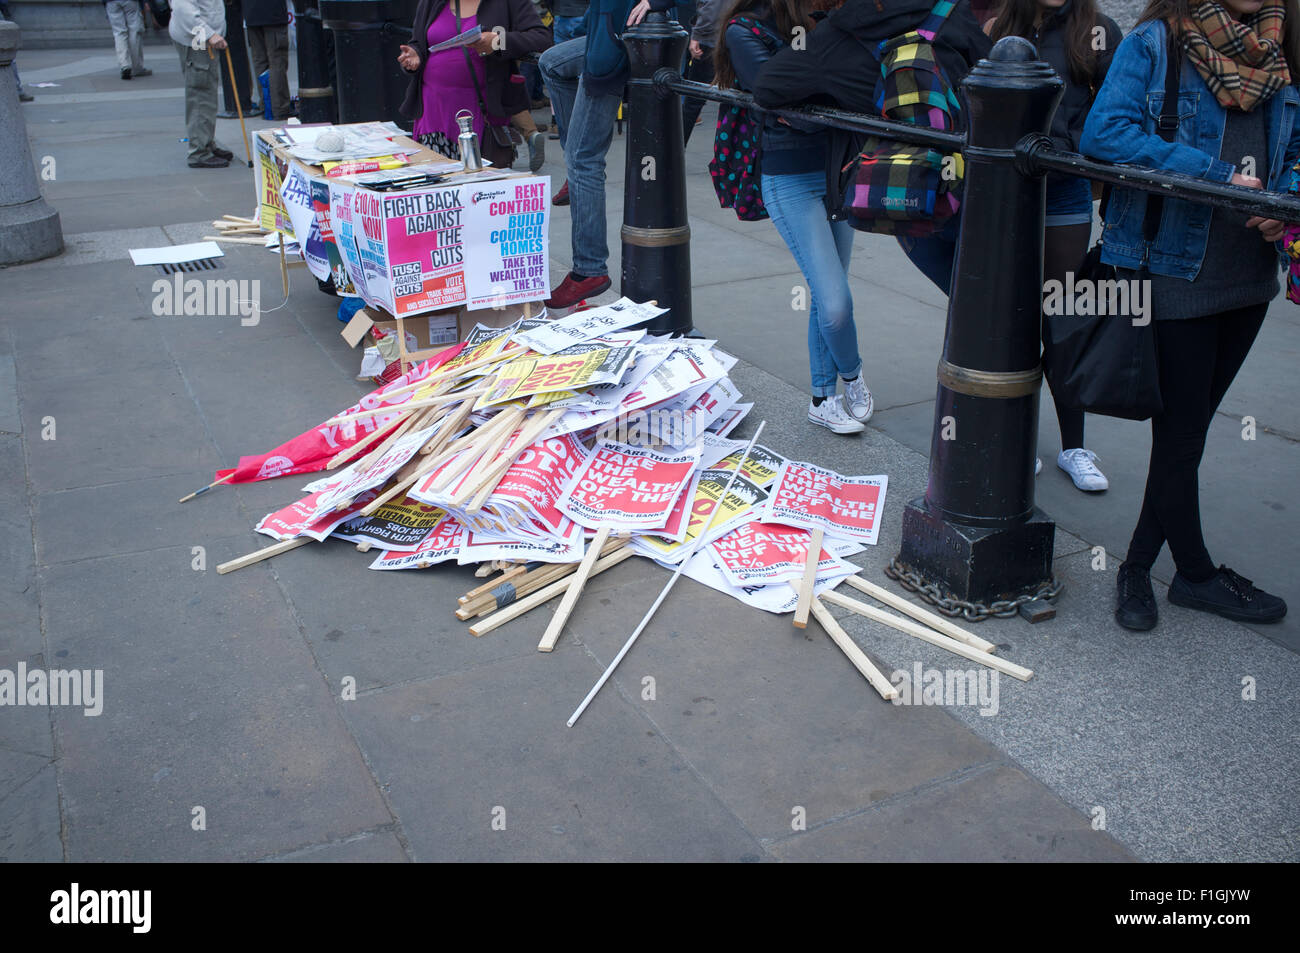 Discarded placards after an anti-austerity demonstration in Trafalgar Square London Stock Photo